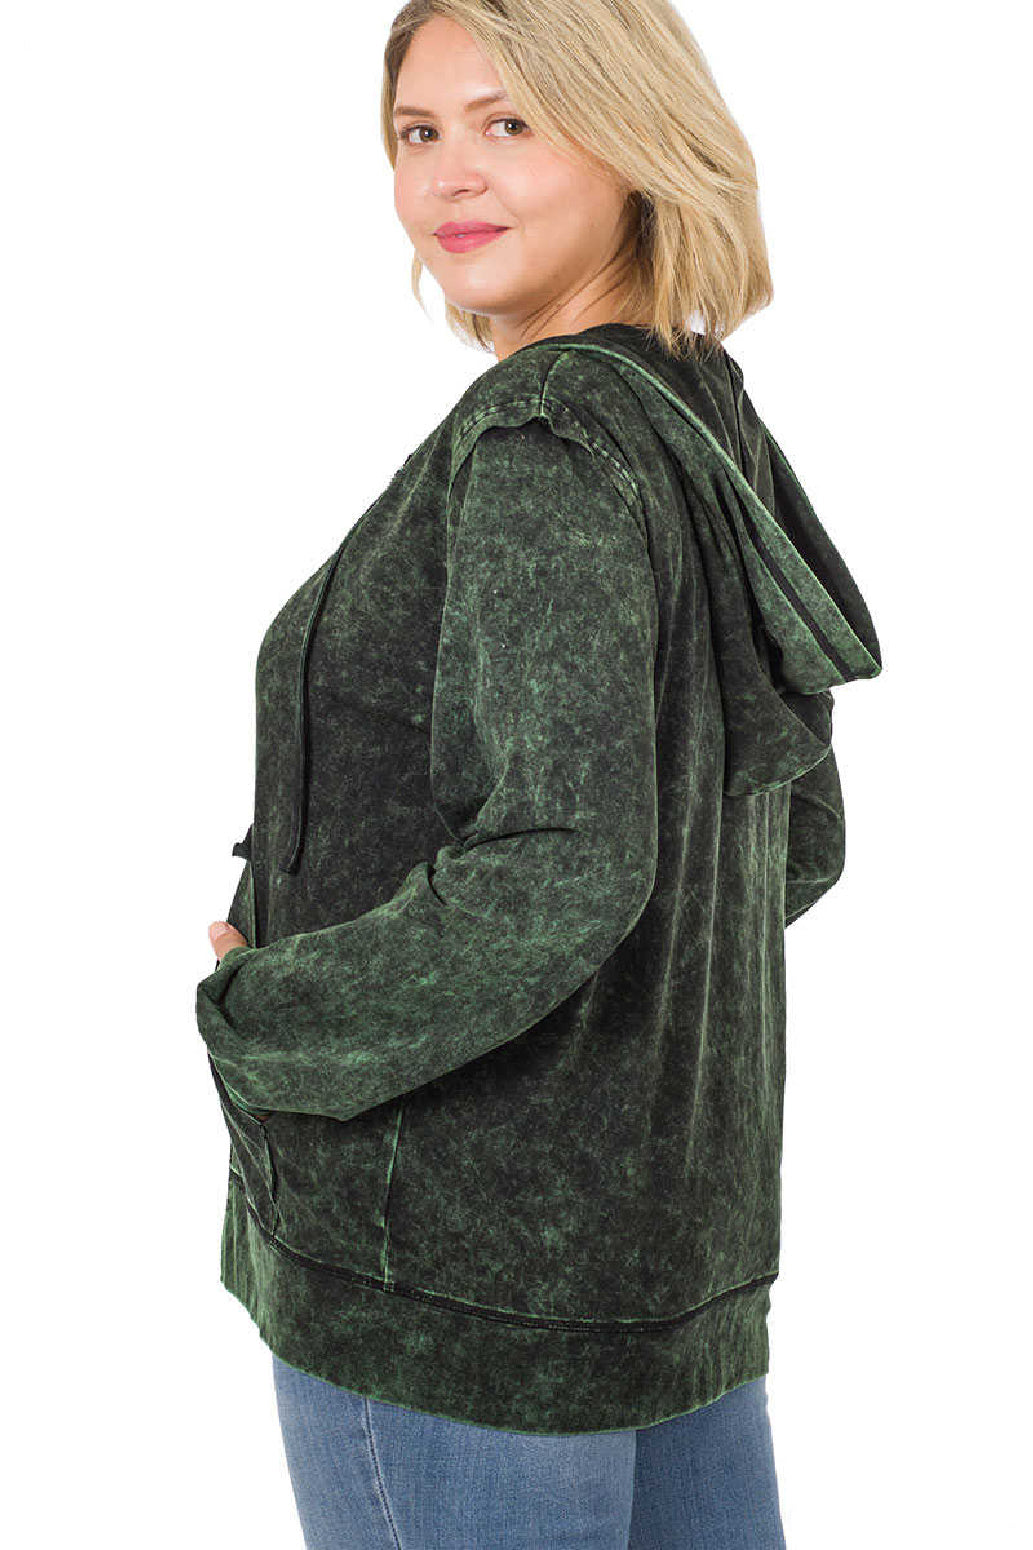 Mineral Wash Army Green Zippered Hoodie